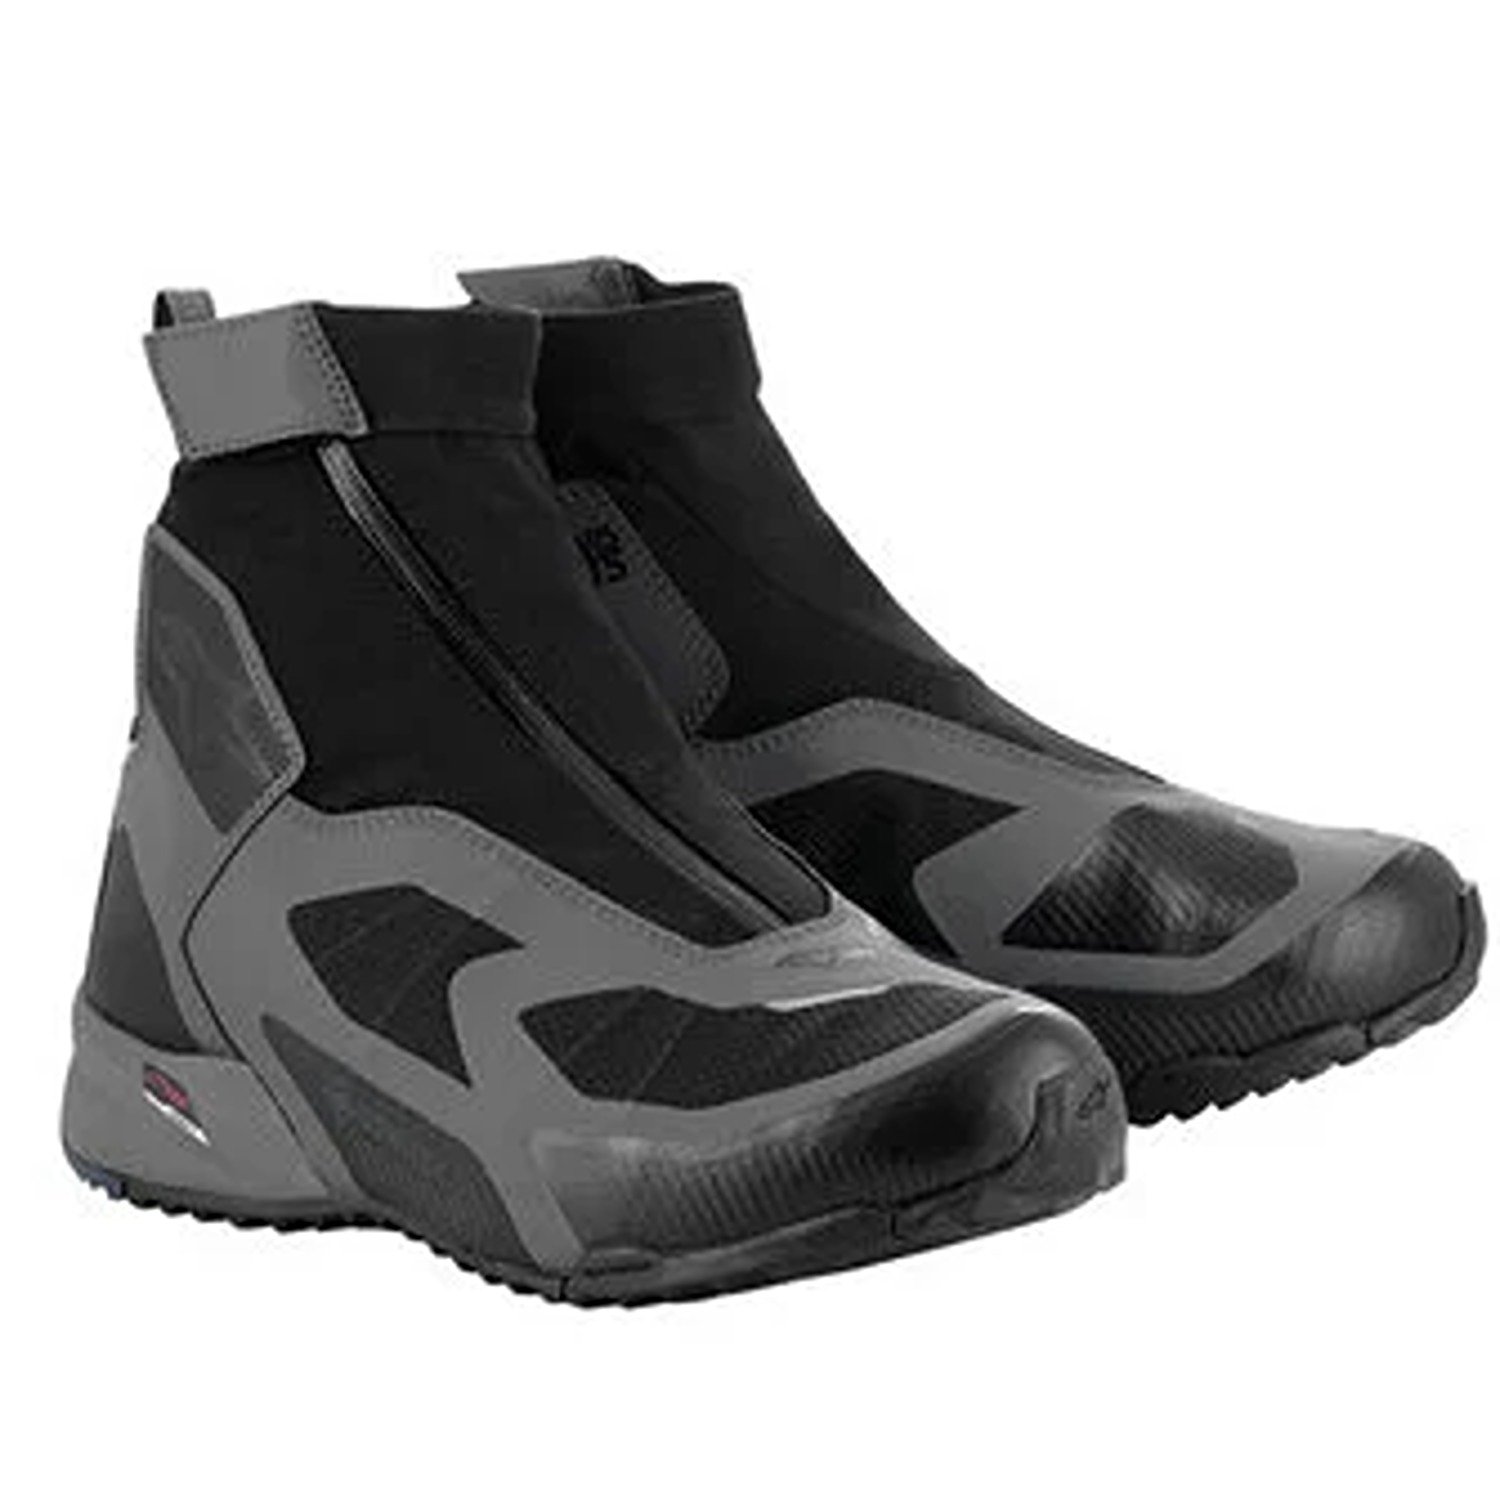 Image of Alpinestars CR-8 Gore-Tex Shoes Black Mid Gray Bright Red Size US 135 EN